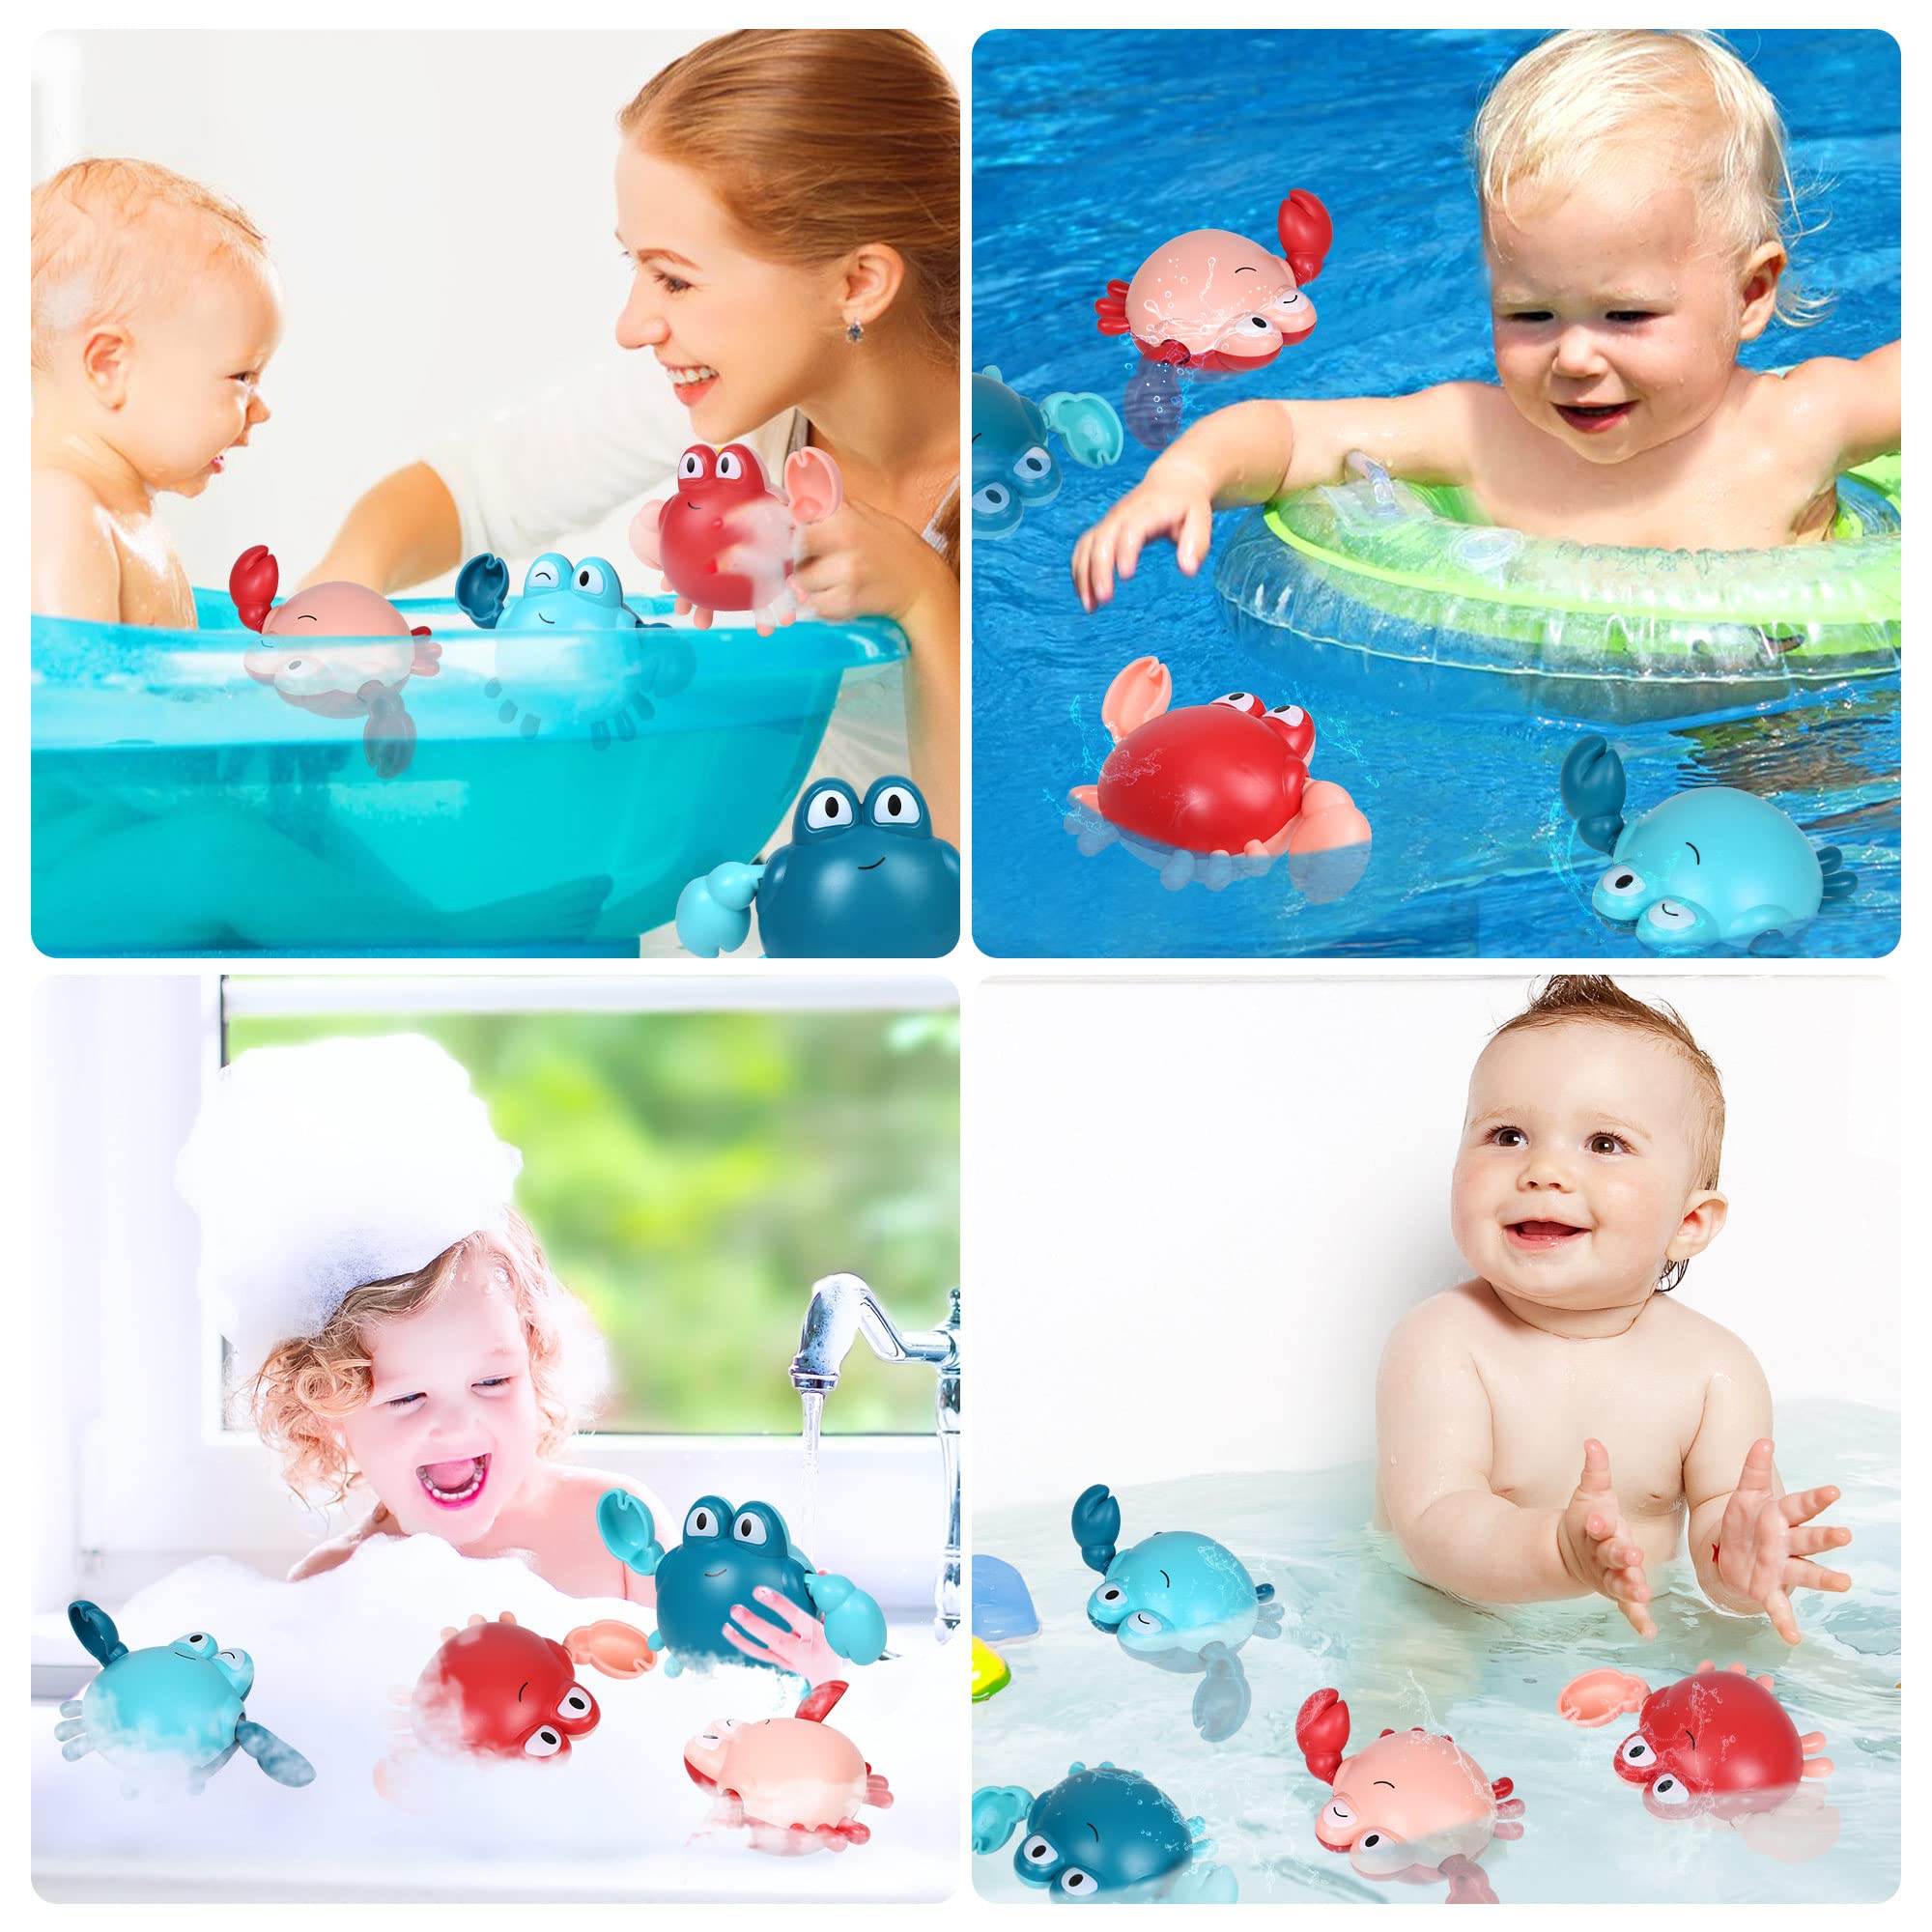 Baby Bath Toys, Bath Toys for Toddlers, Cute Swimming Crab Bath Toys for Kids, for Kids (4 Pcs)